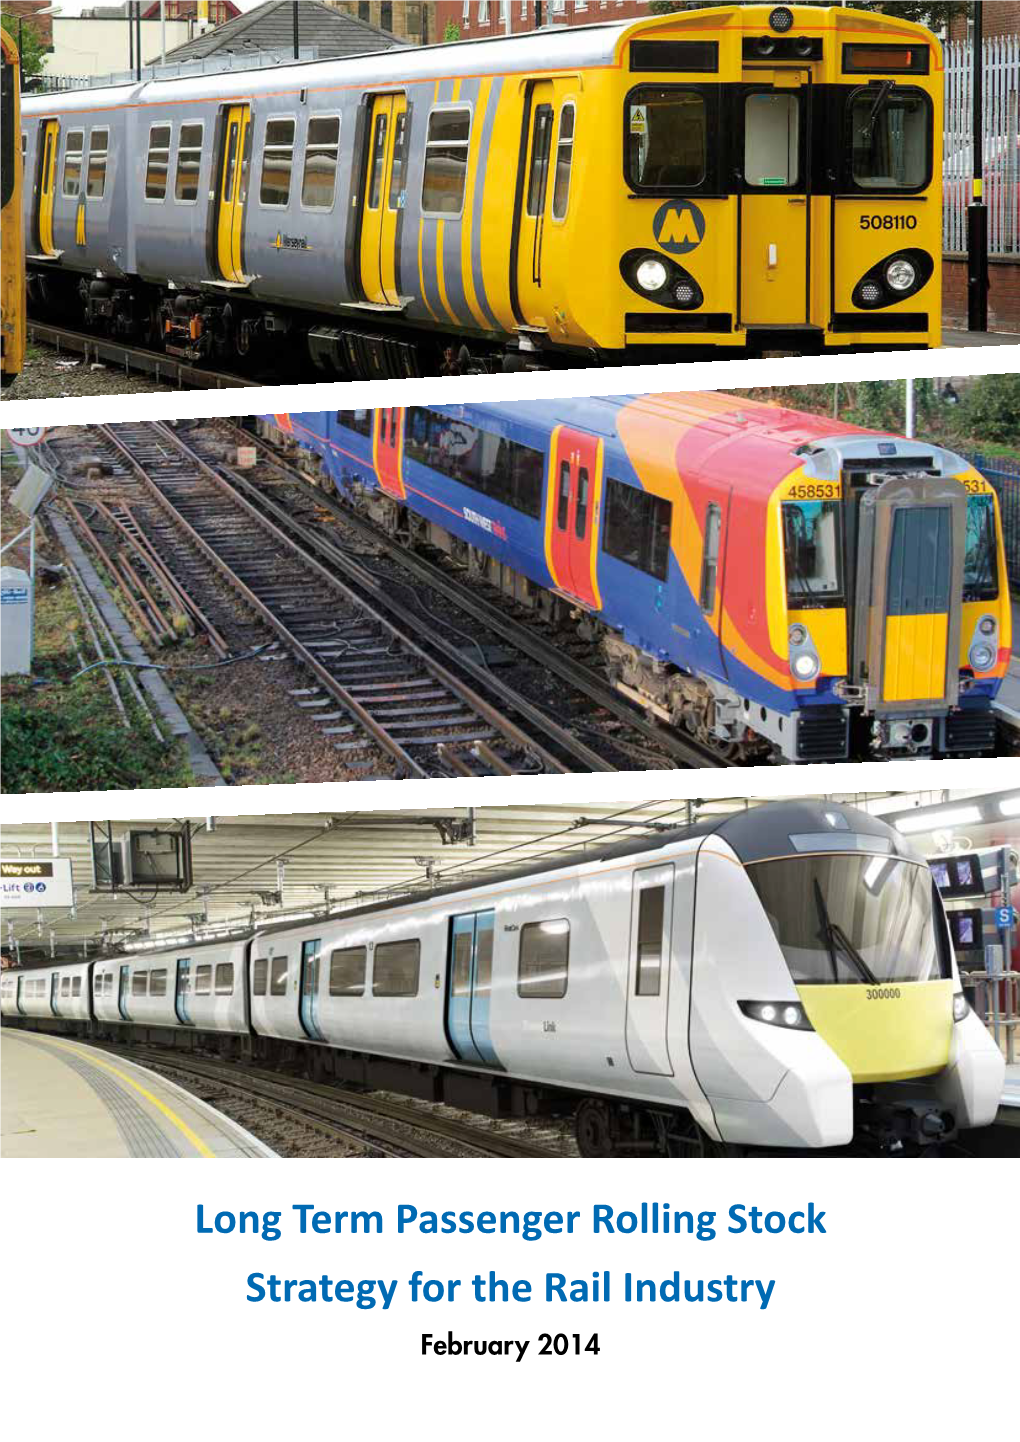 Long Term Passenger Rolling Stock Strategy for the Rail Industry